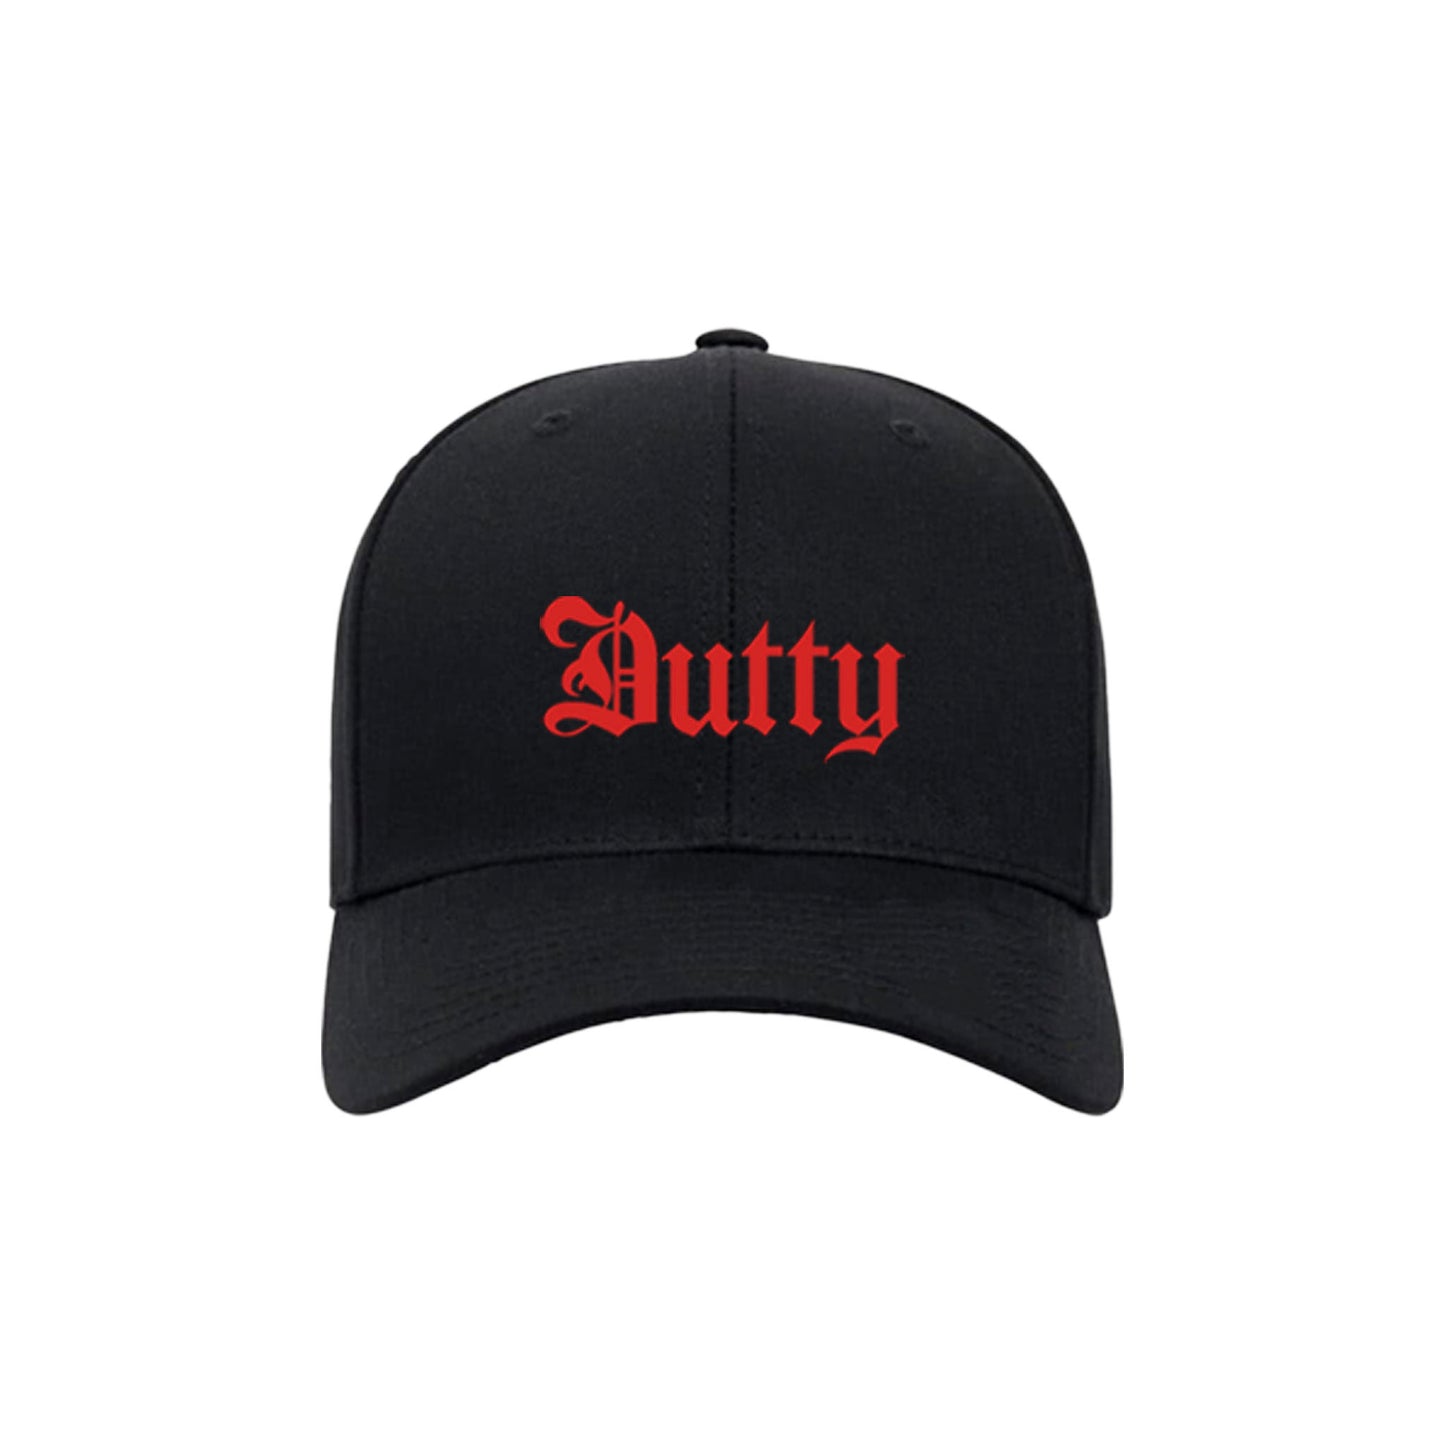 Dutty Snapback Hat - Red